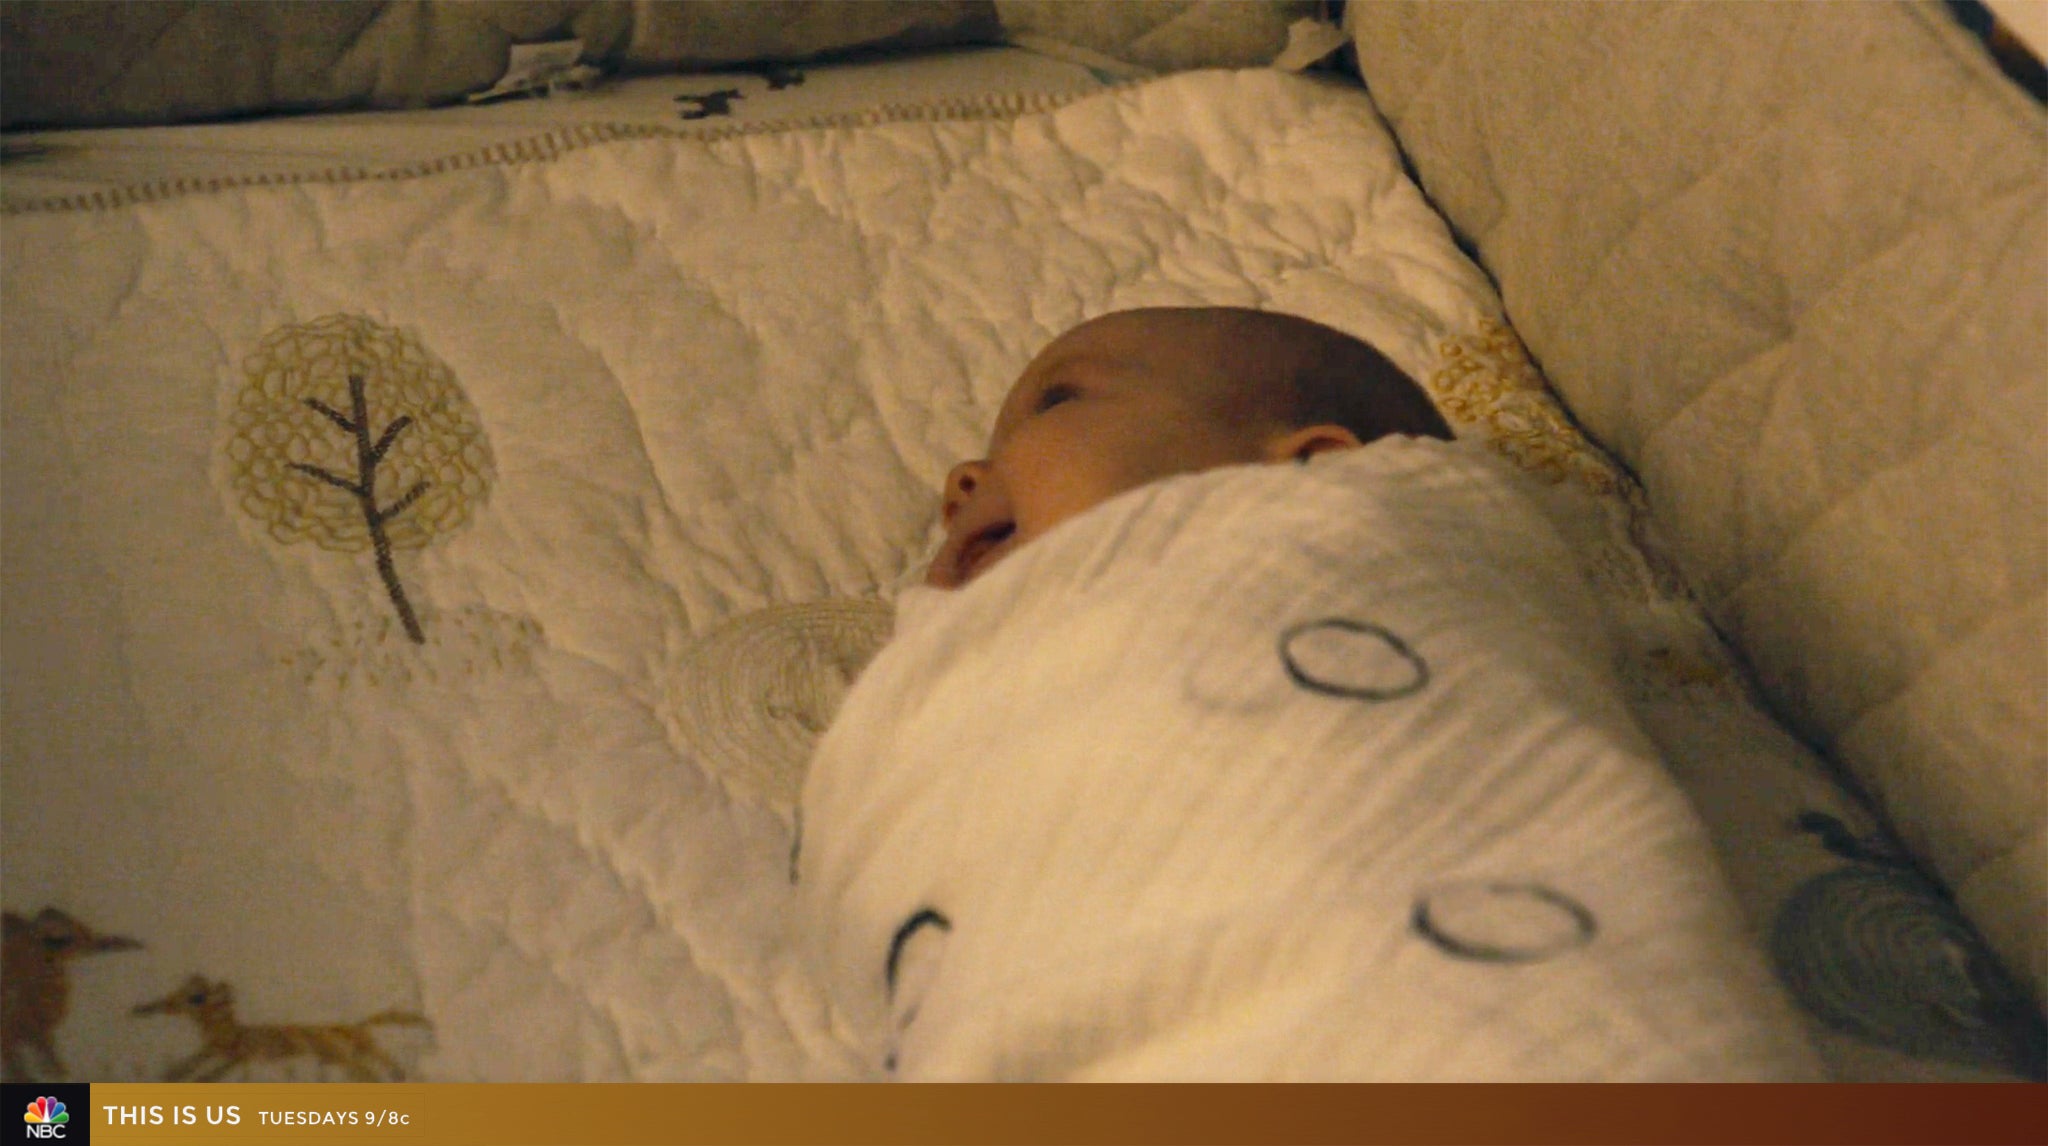 SwaddleDesigns Ring Muslin Swaddle on NBC This is Us